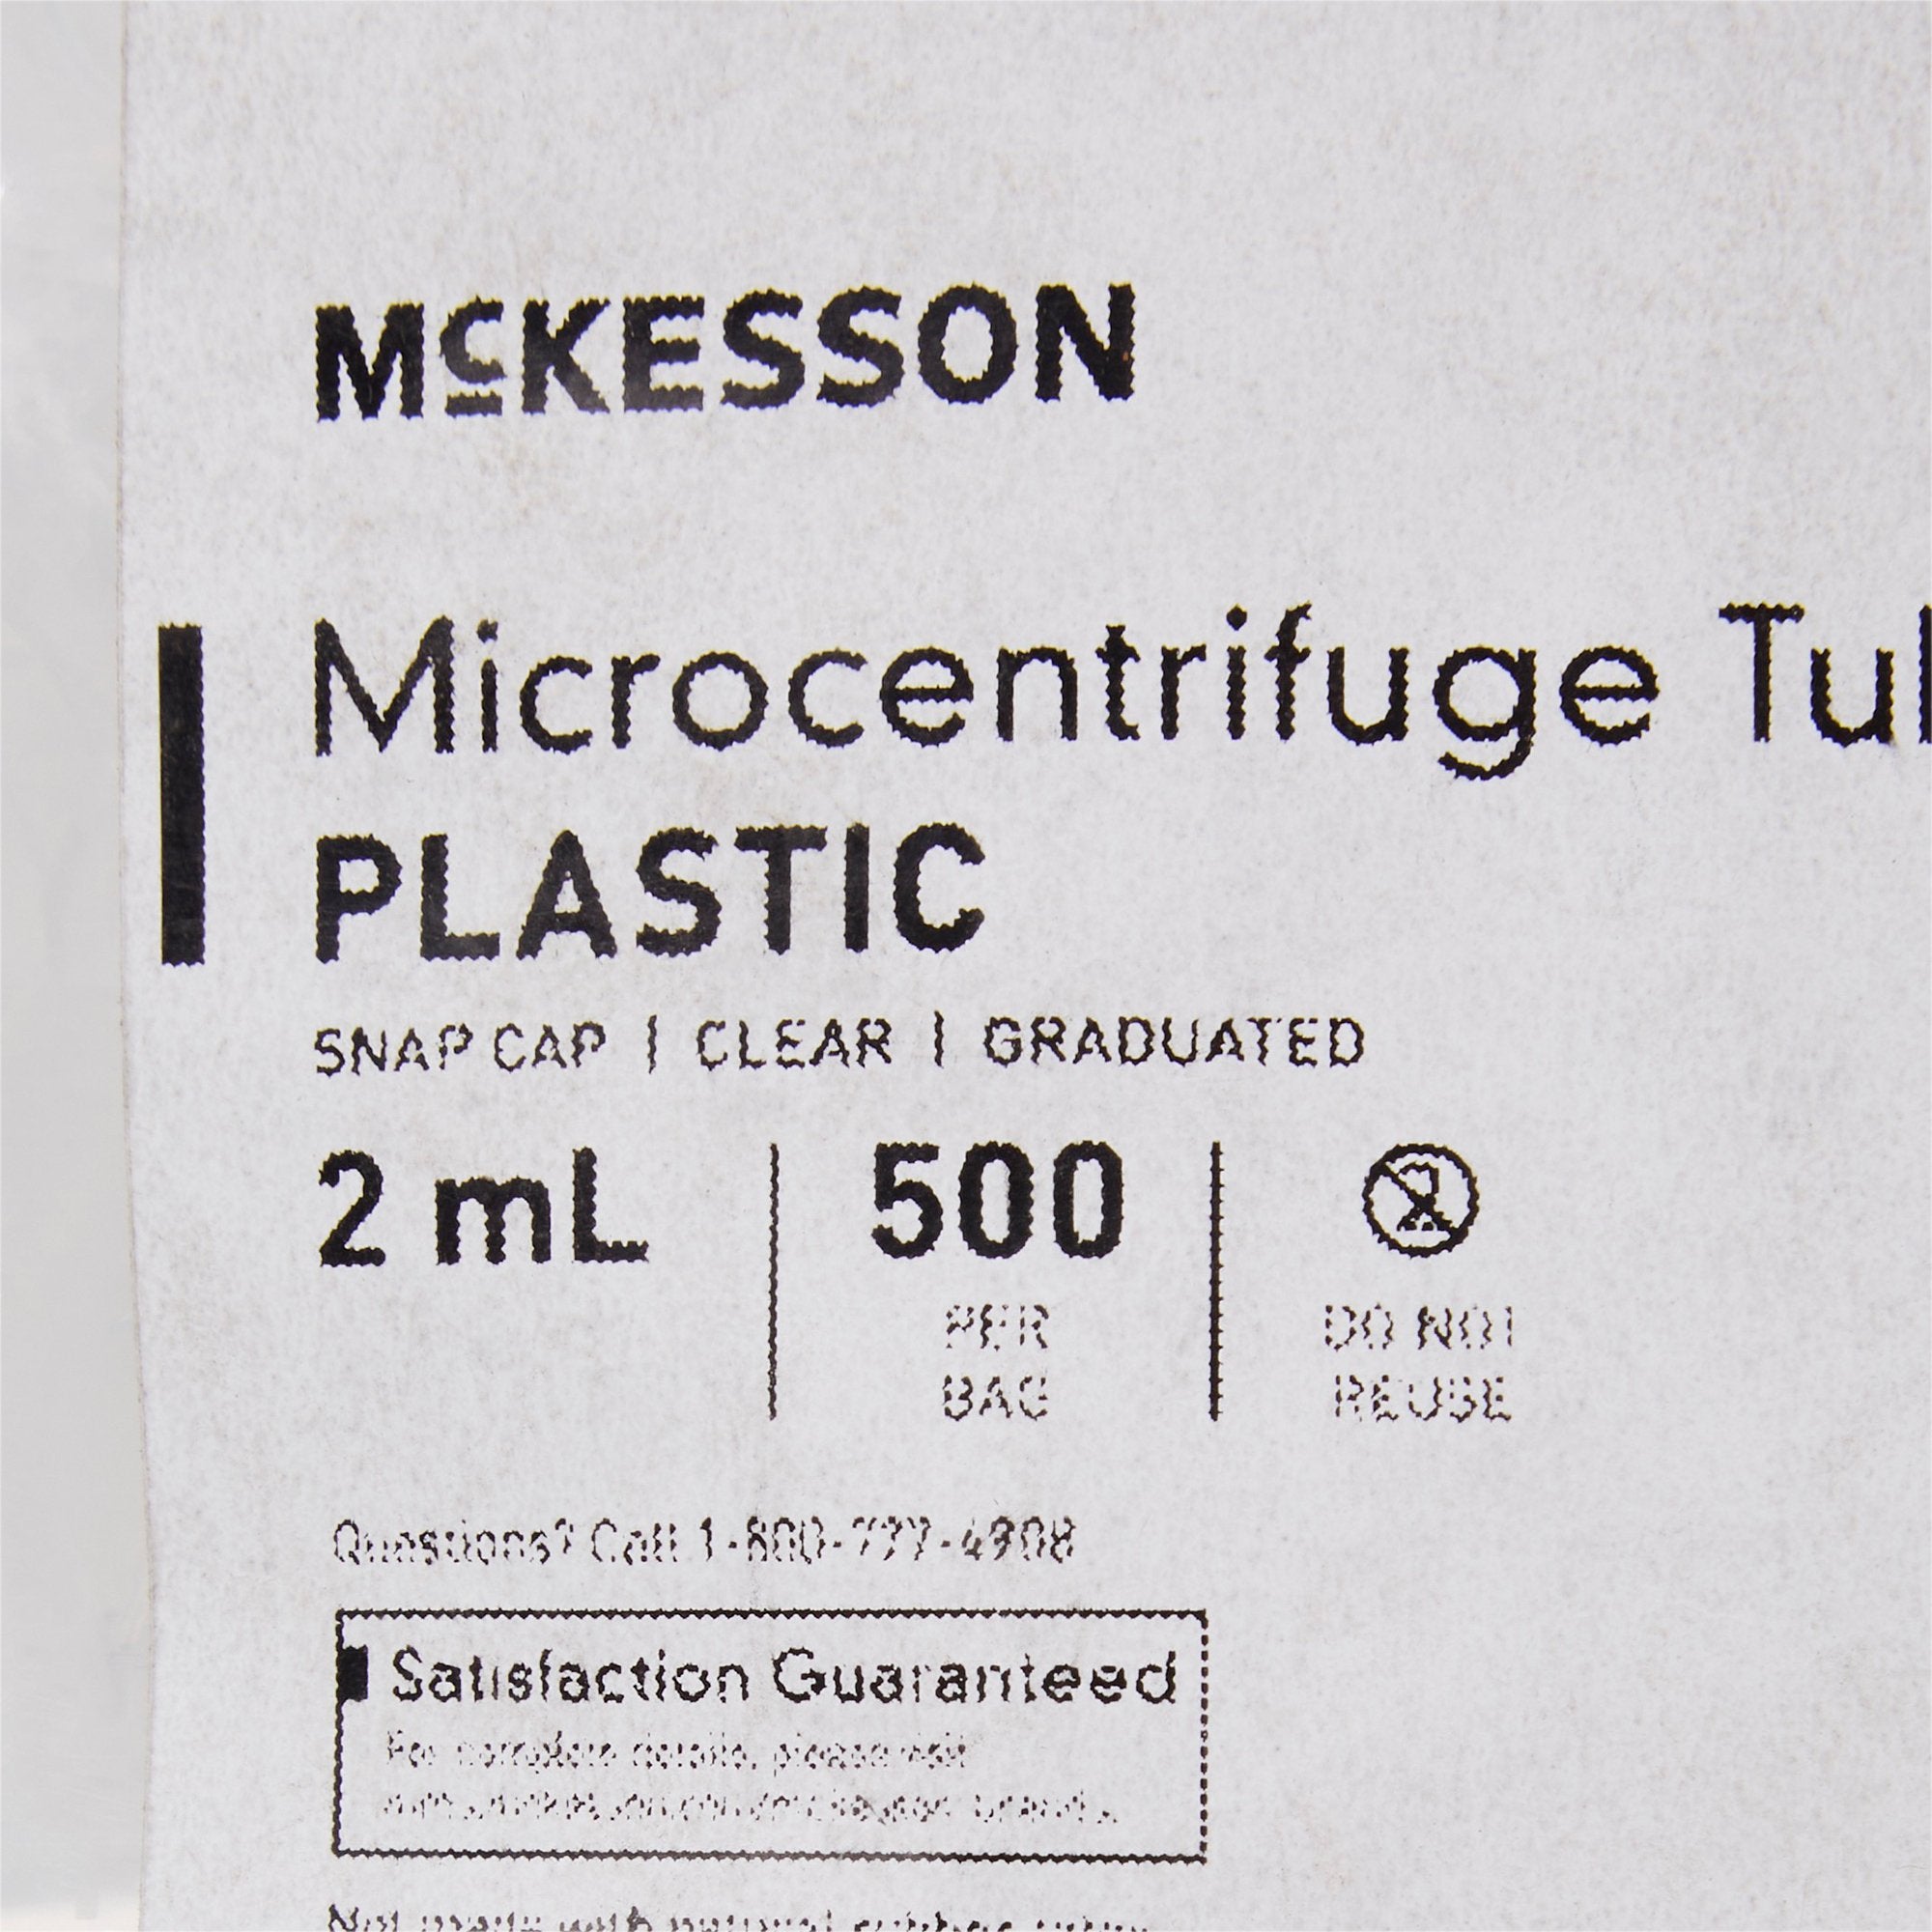 McKesson Microcentrifuge Tube Conical Bottom Plain 2 mL Without Color Coding Snap Cap Polypropylene Tube